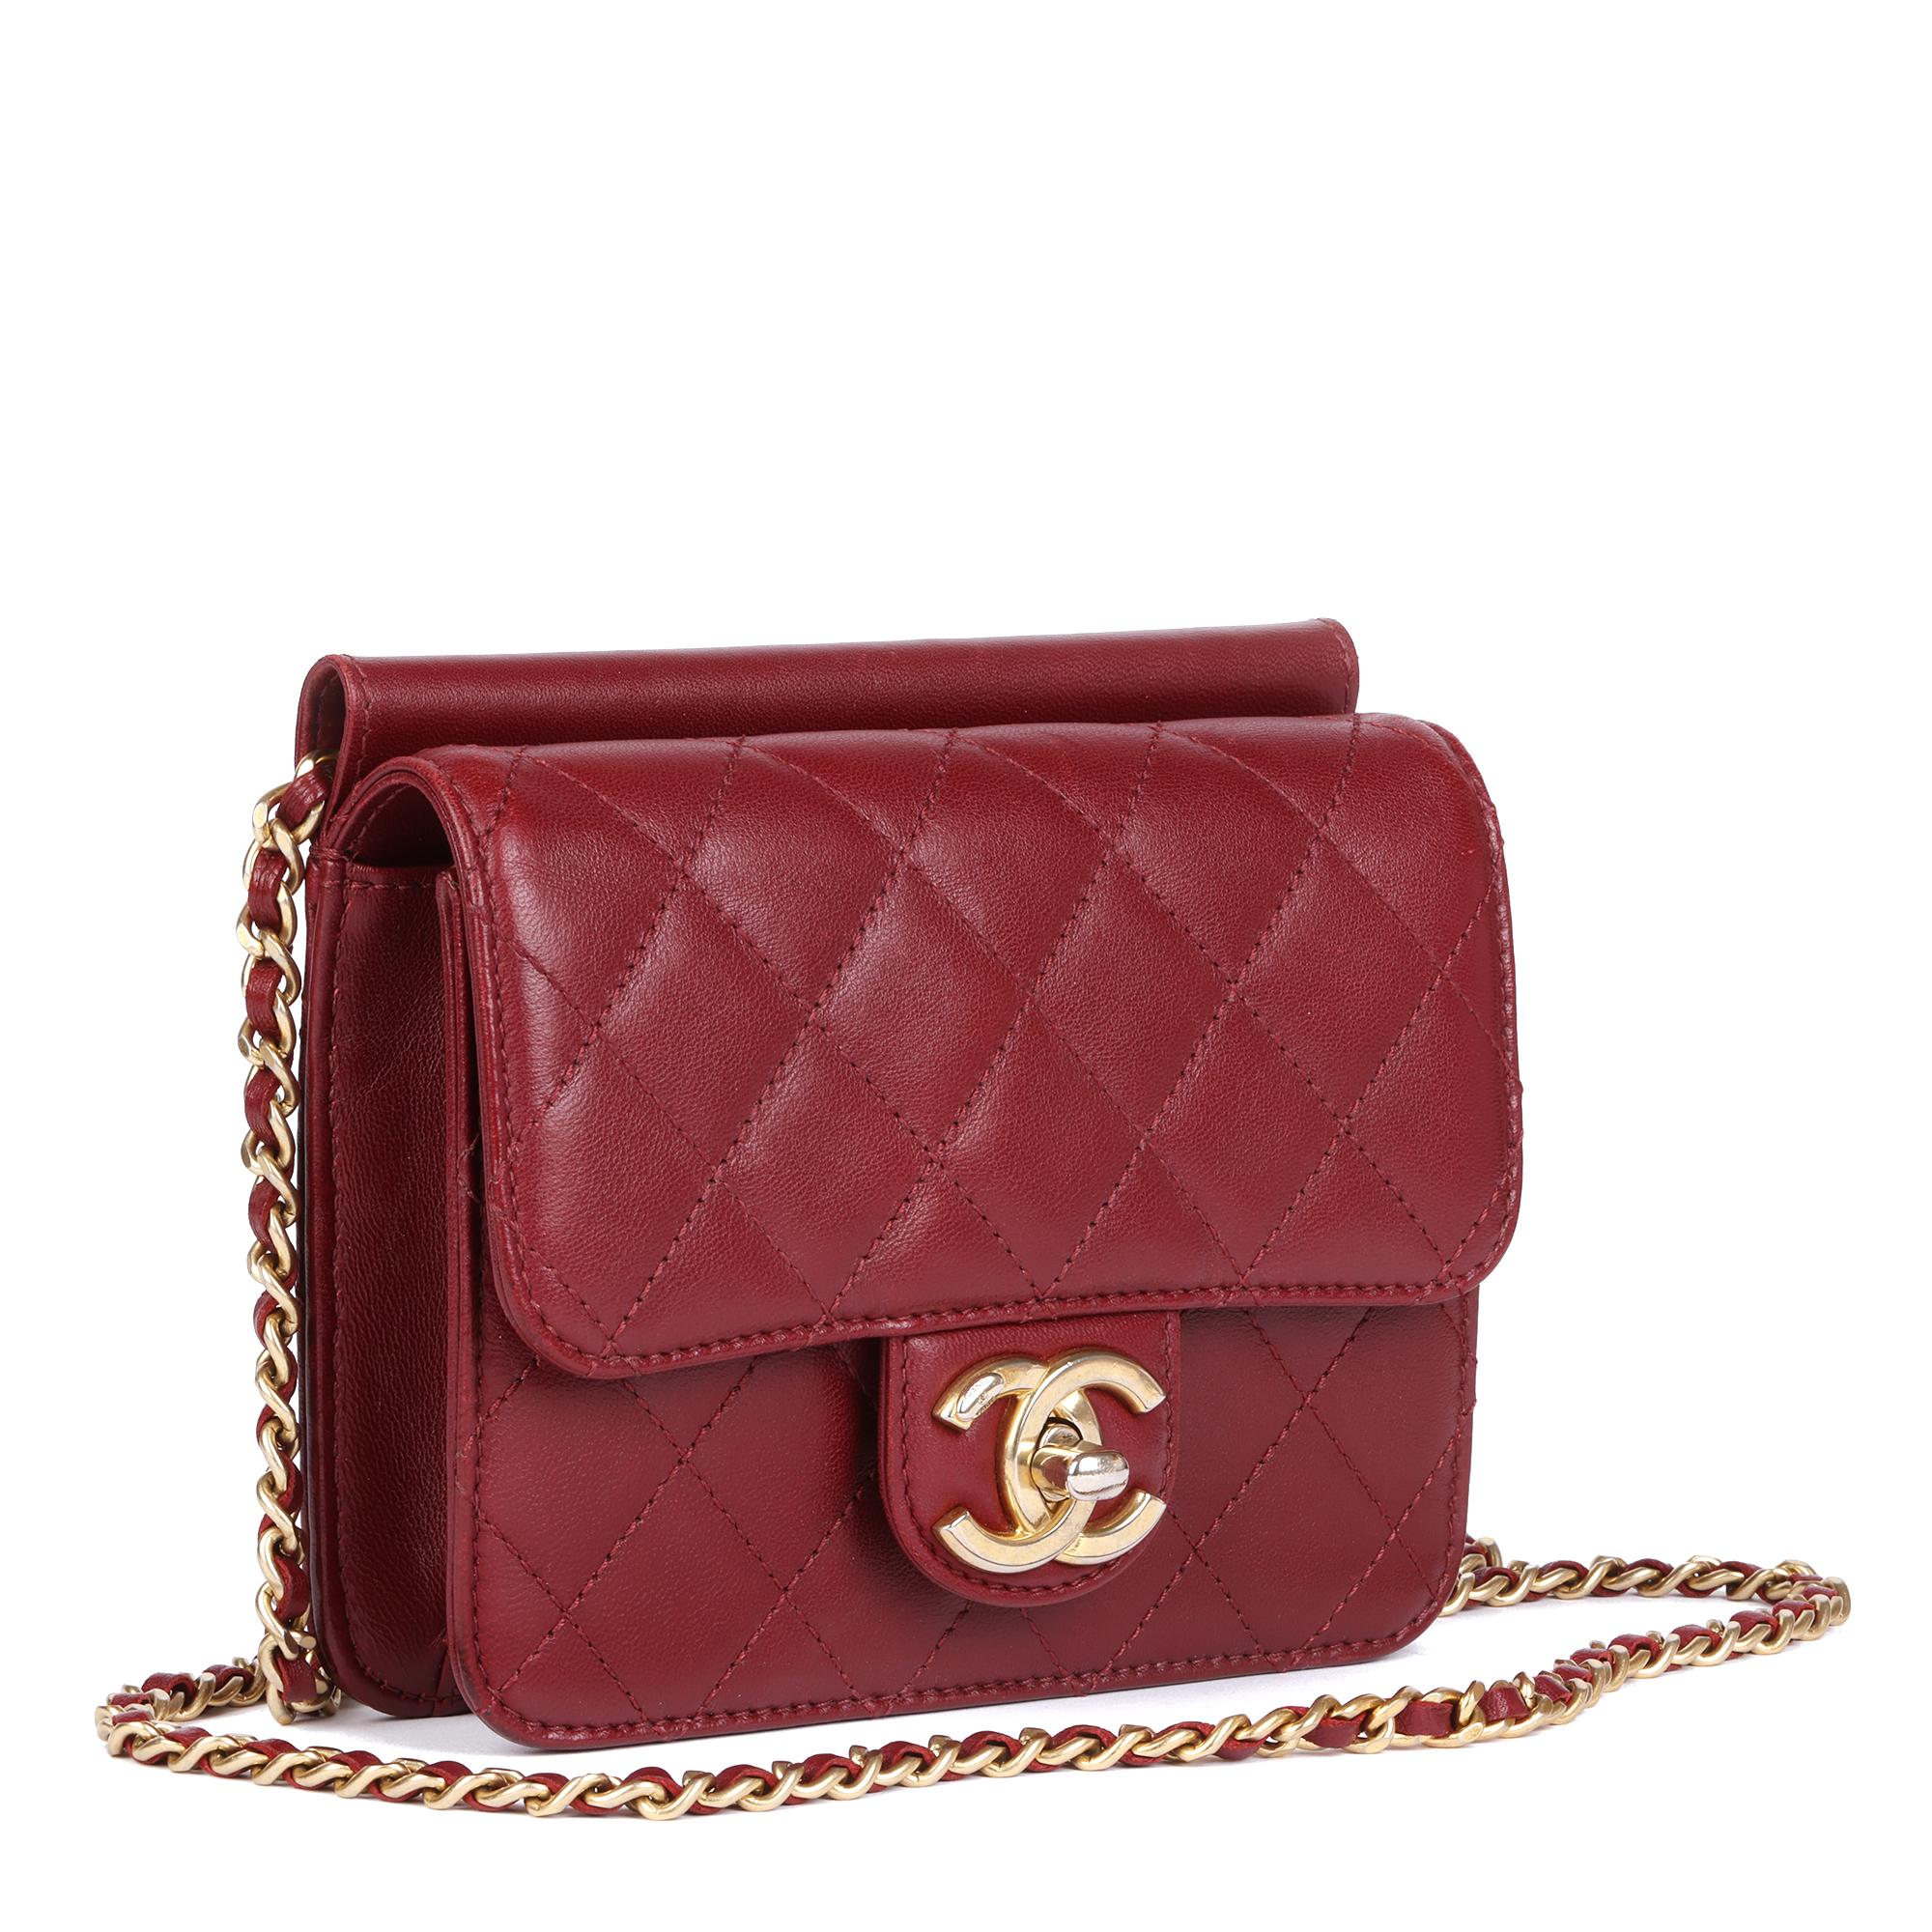 CHANEL
Burgundy Quilted Lambskin Mini Flap Bag

Serial Number: 18806865
Age (Circa): 2015
Accompanied By: Chanel Dust Bag, Care Booklet, Authenticity Card
Authenticity Details: Authenticity Card, Serial Sticker (Made in Italy)
Gender: Ladies
Type: